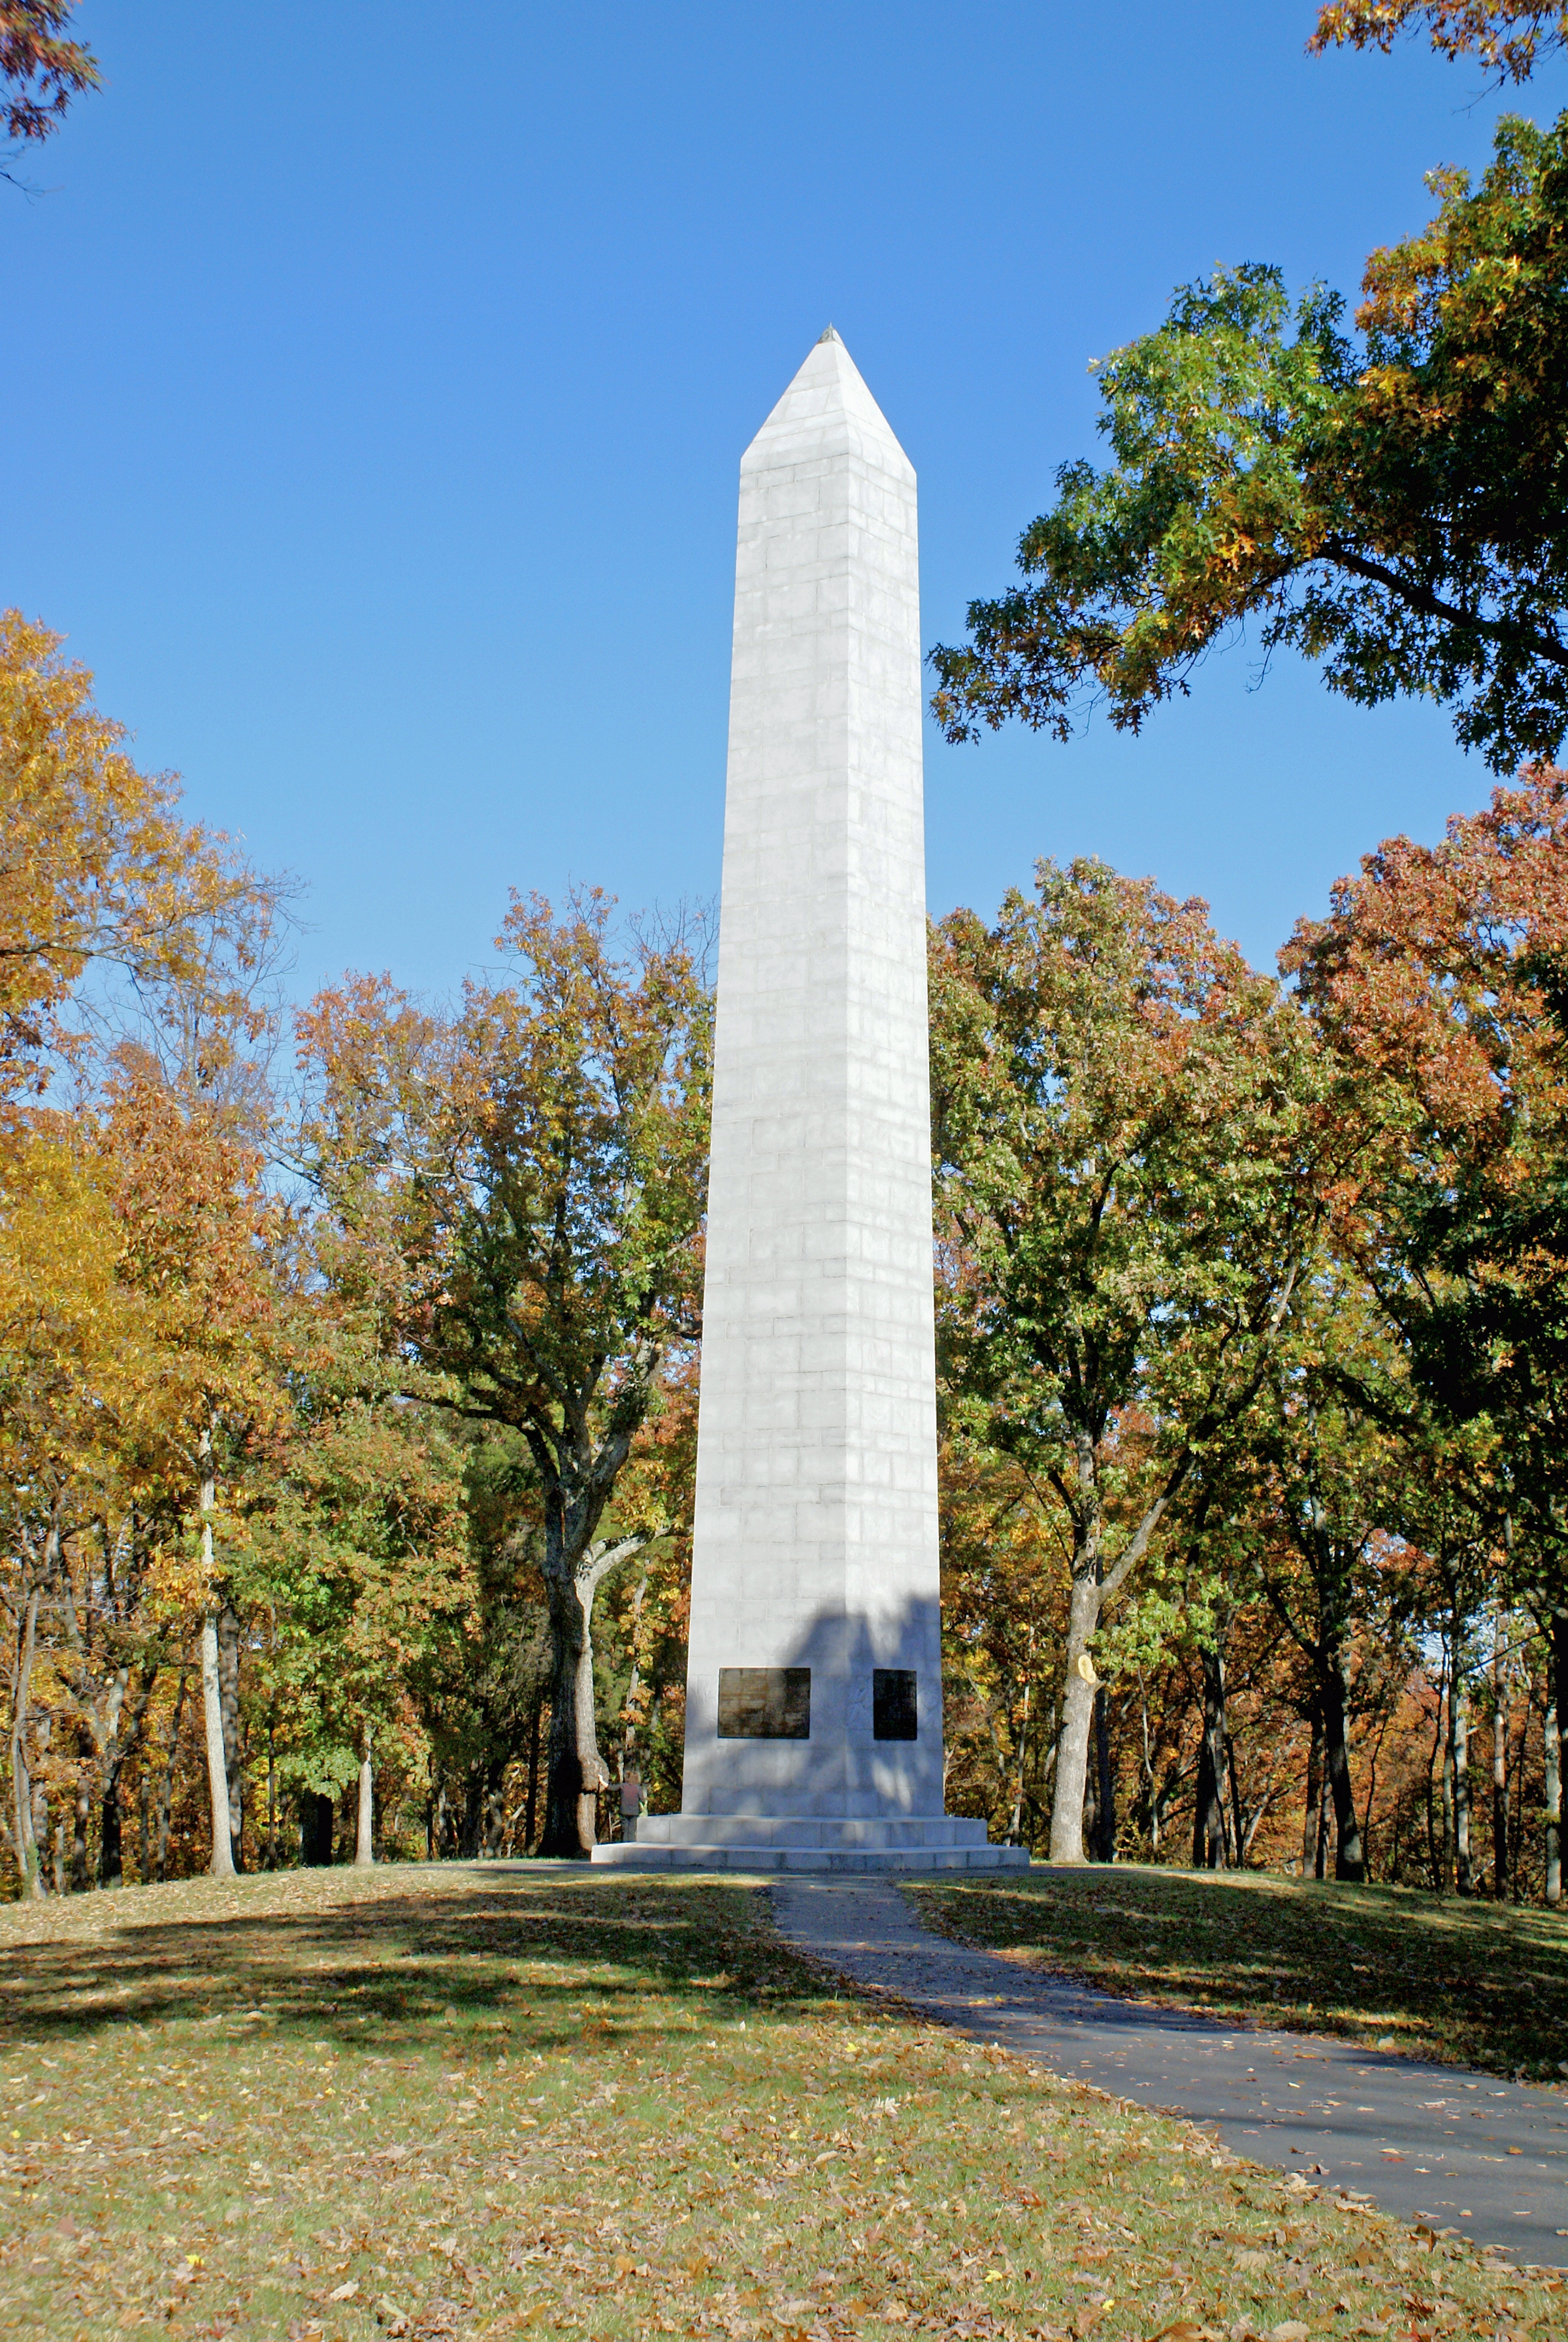 The US Monument is surrounded by trees that are turning orange and yellow.